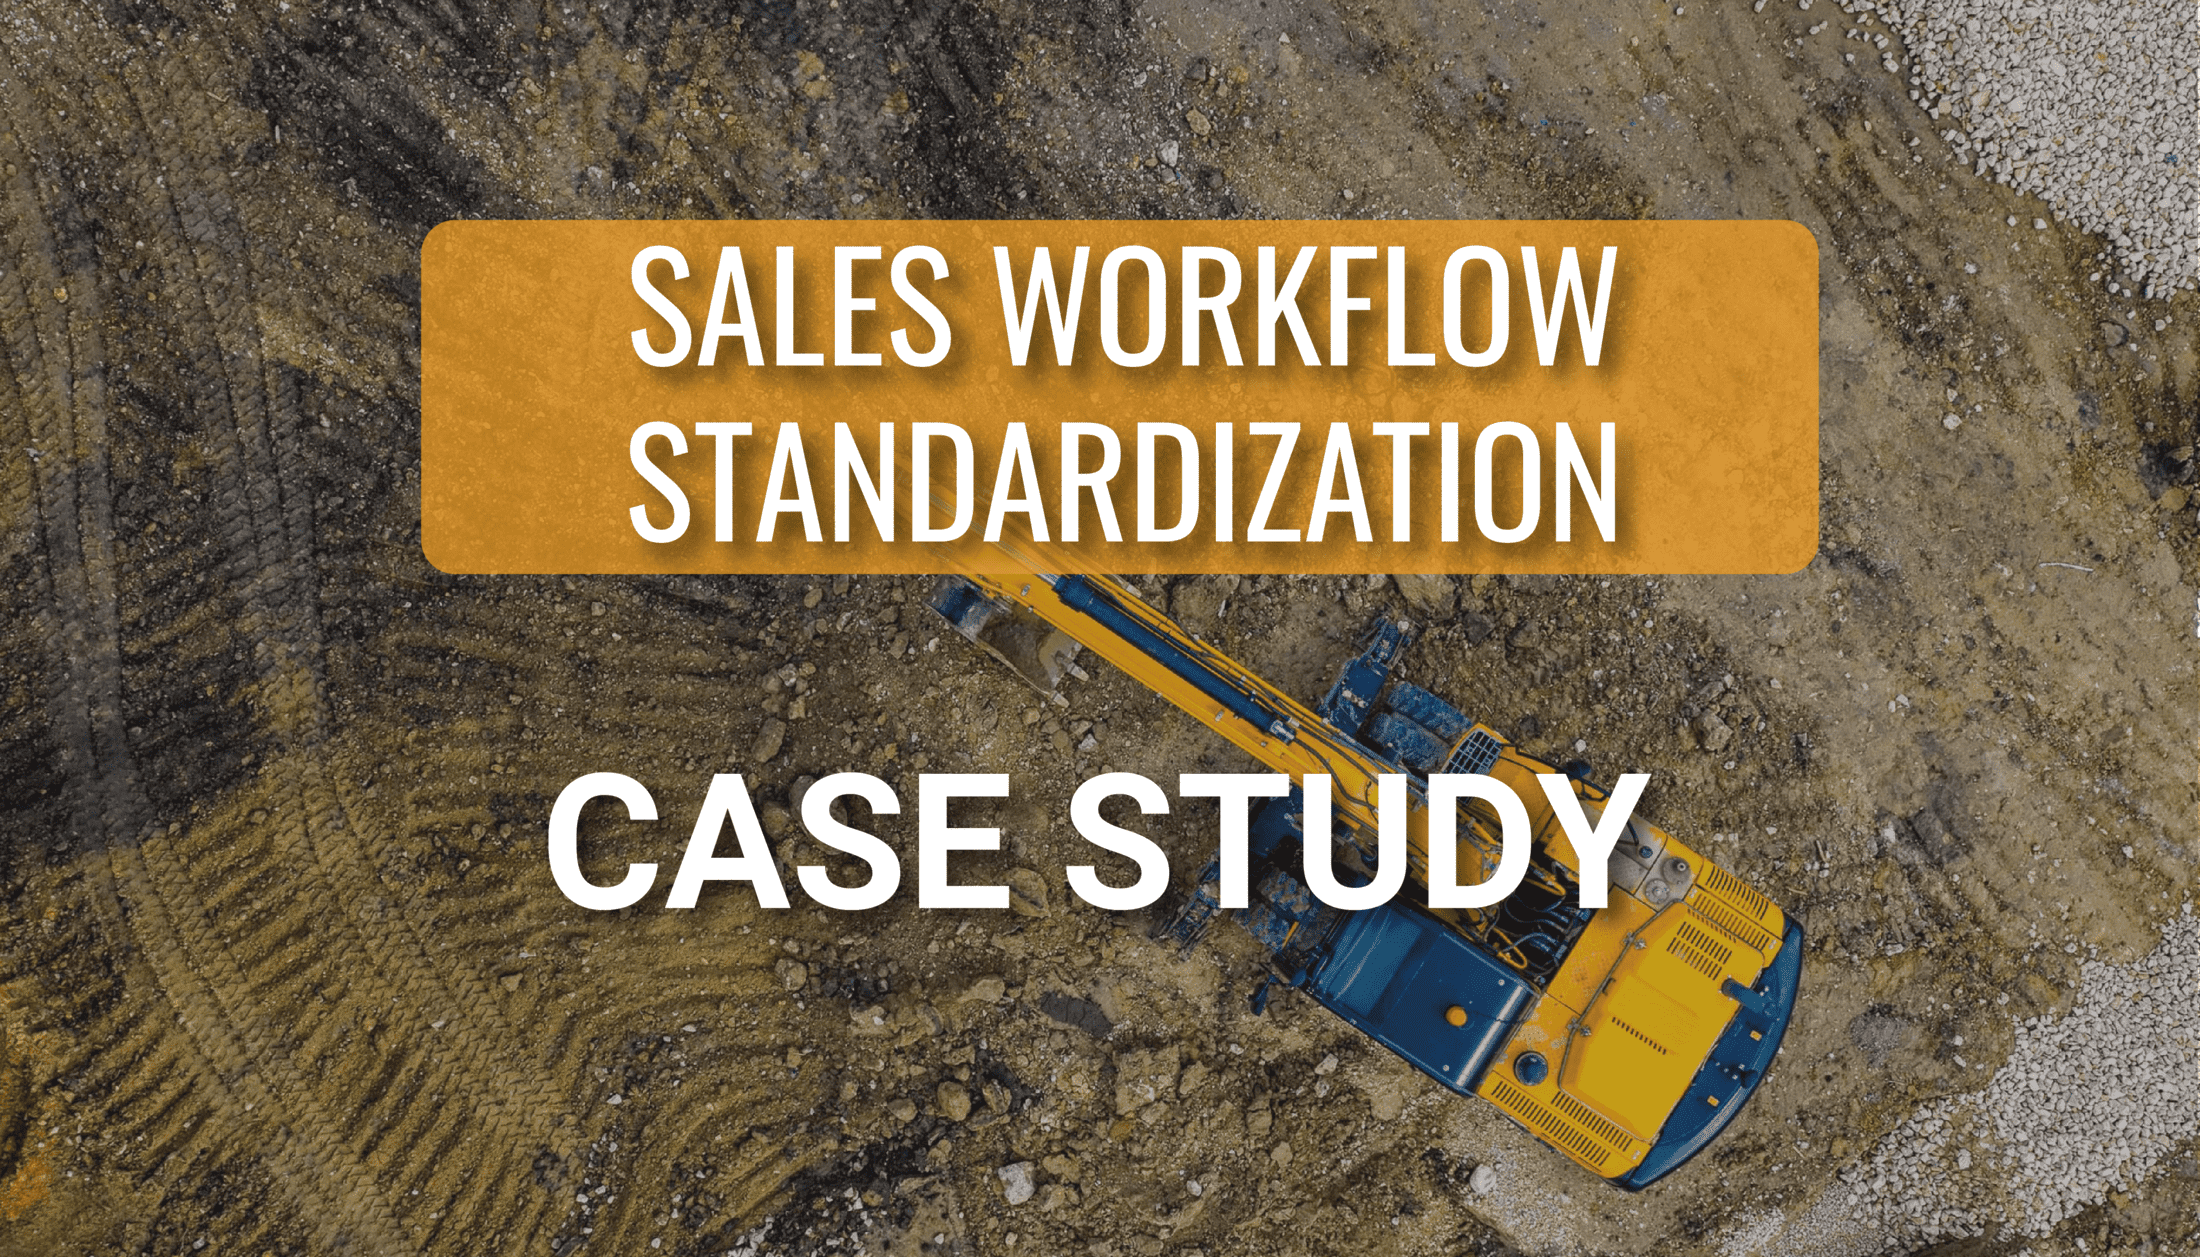 salesforce for construction case study